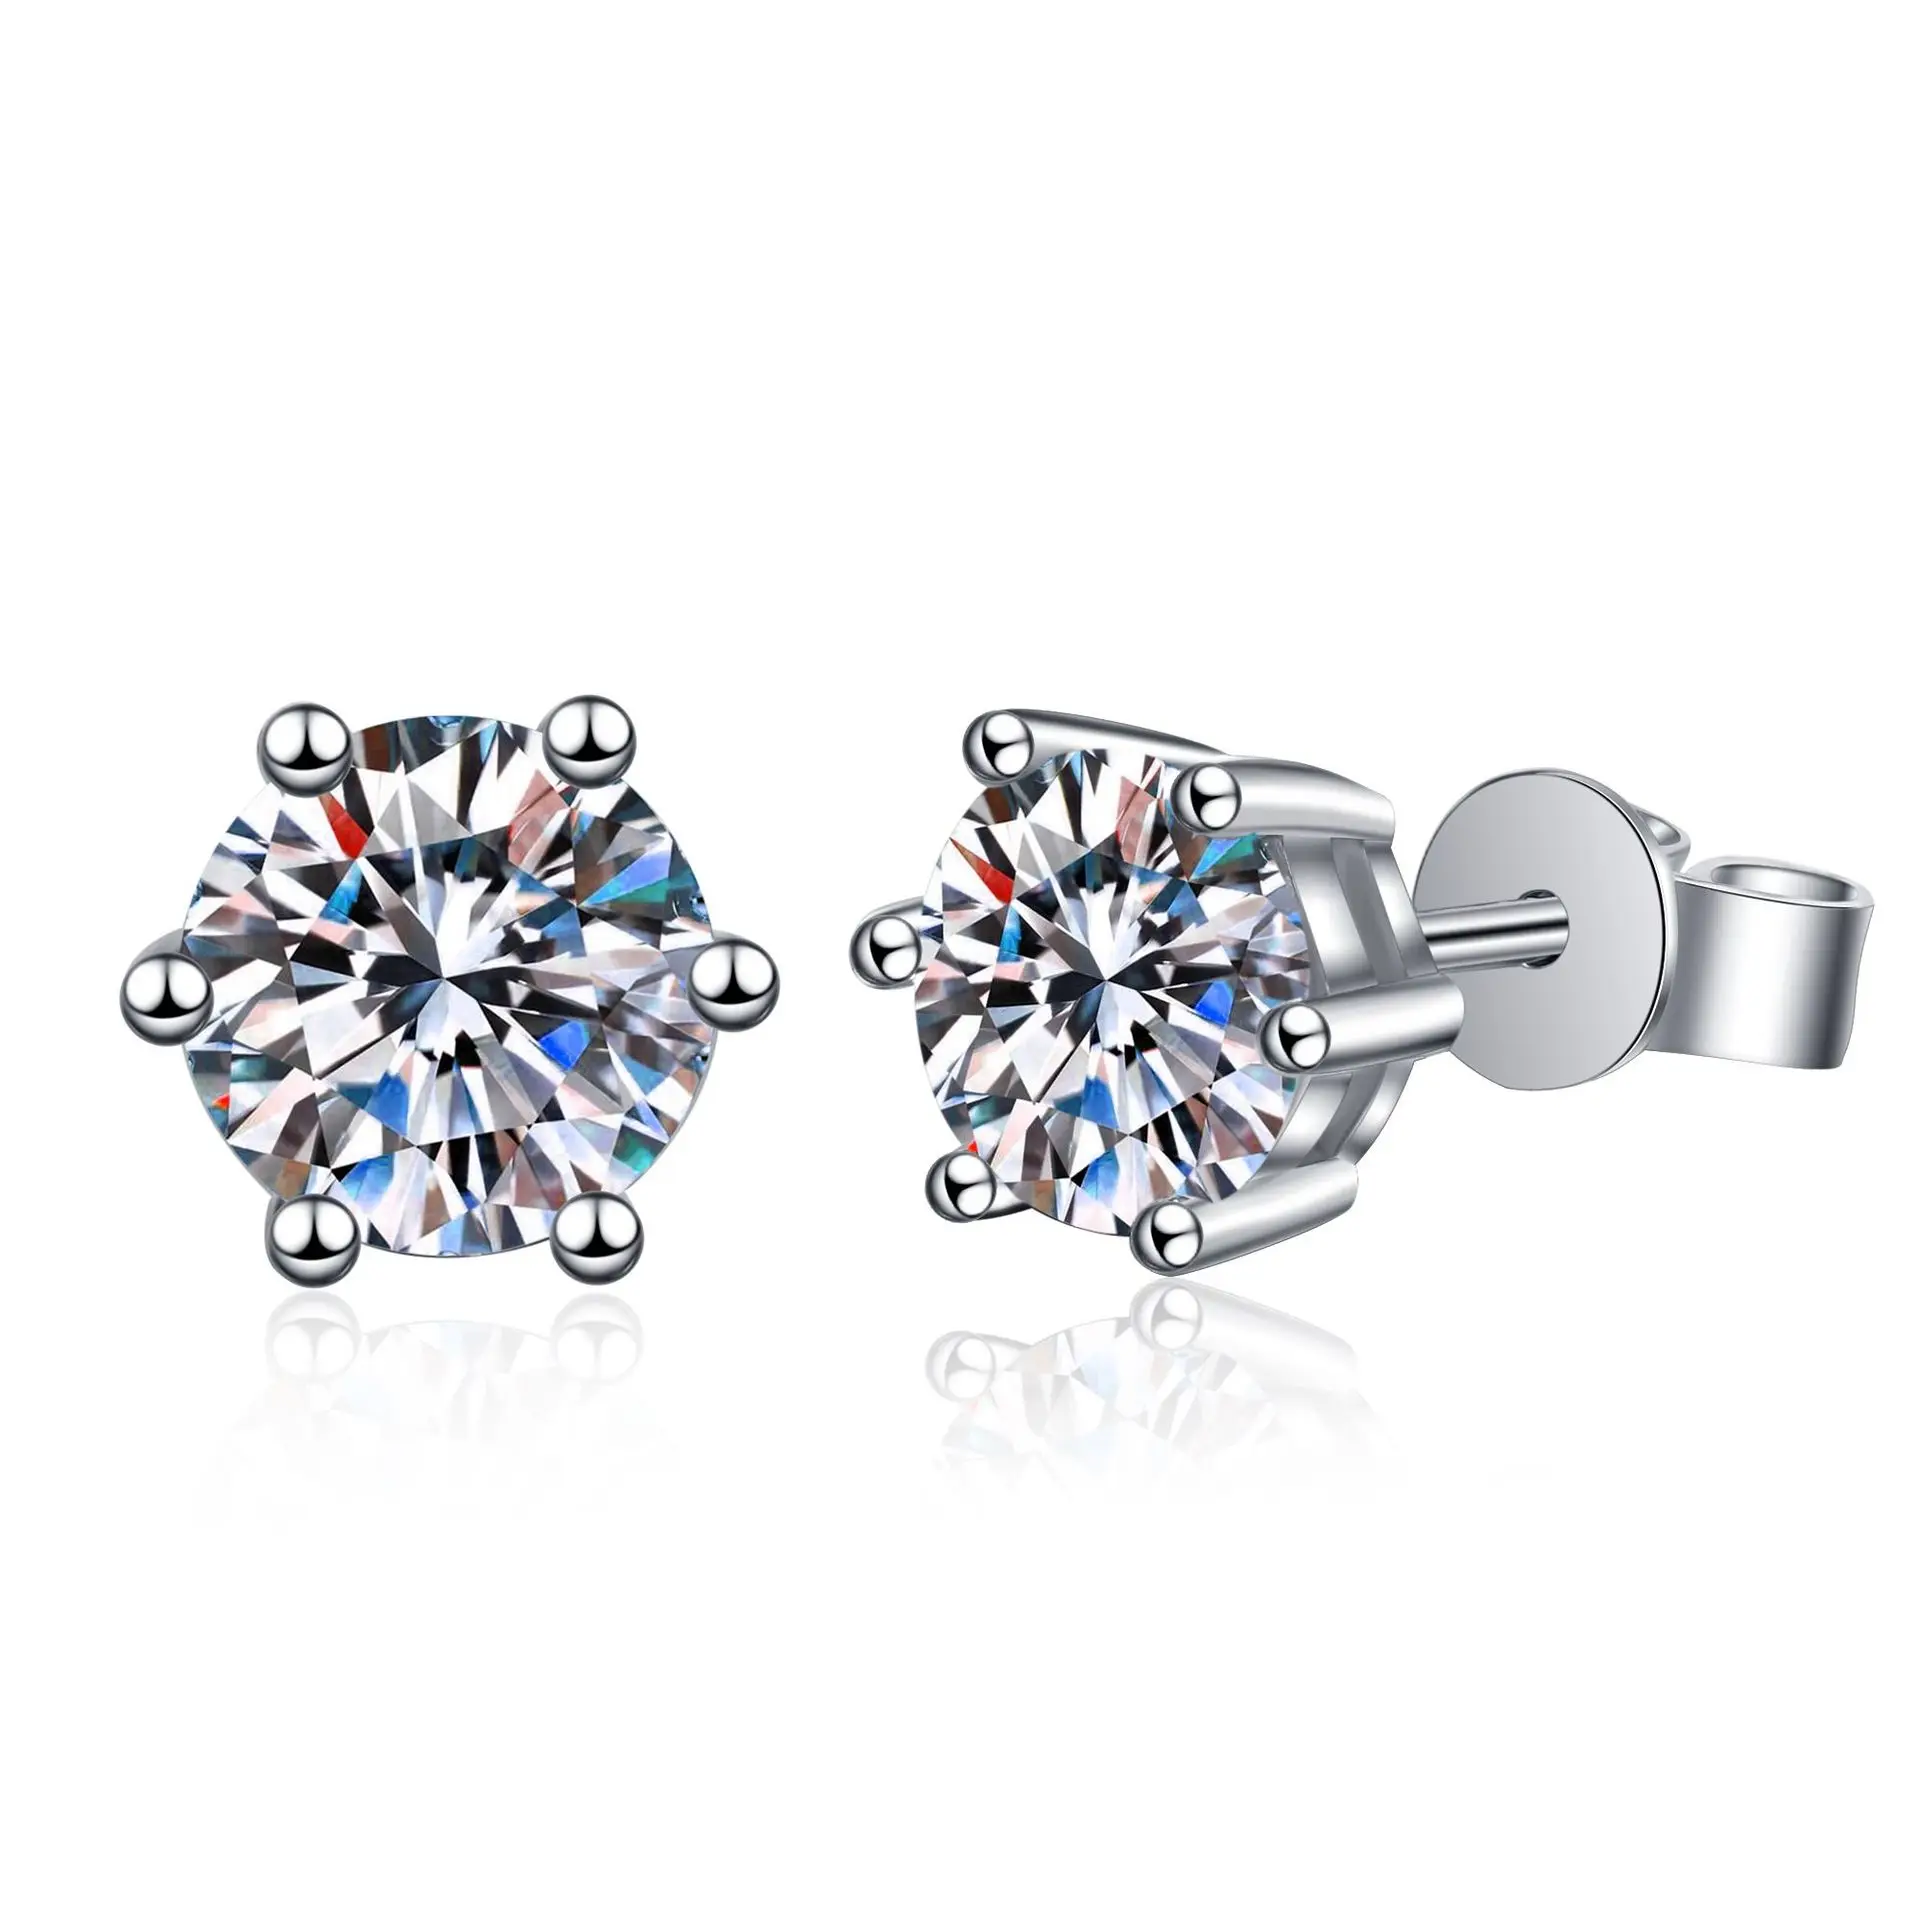 

925 Sterling Silver Stud Earrings for Women Men 18k White Gold Plated 6-Prong Pure Brilliance Round Cubic Zirconia Stud Jewelry